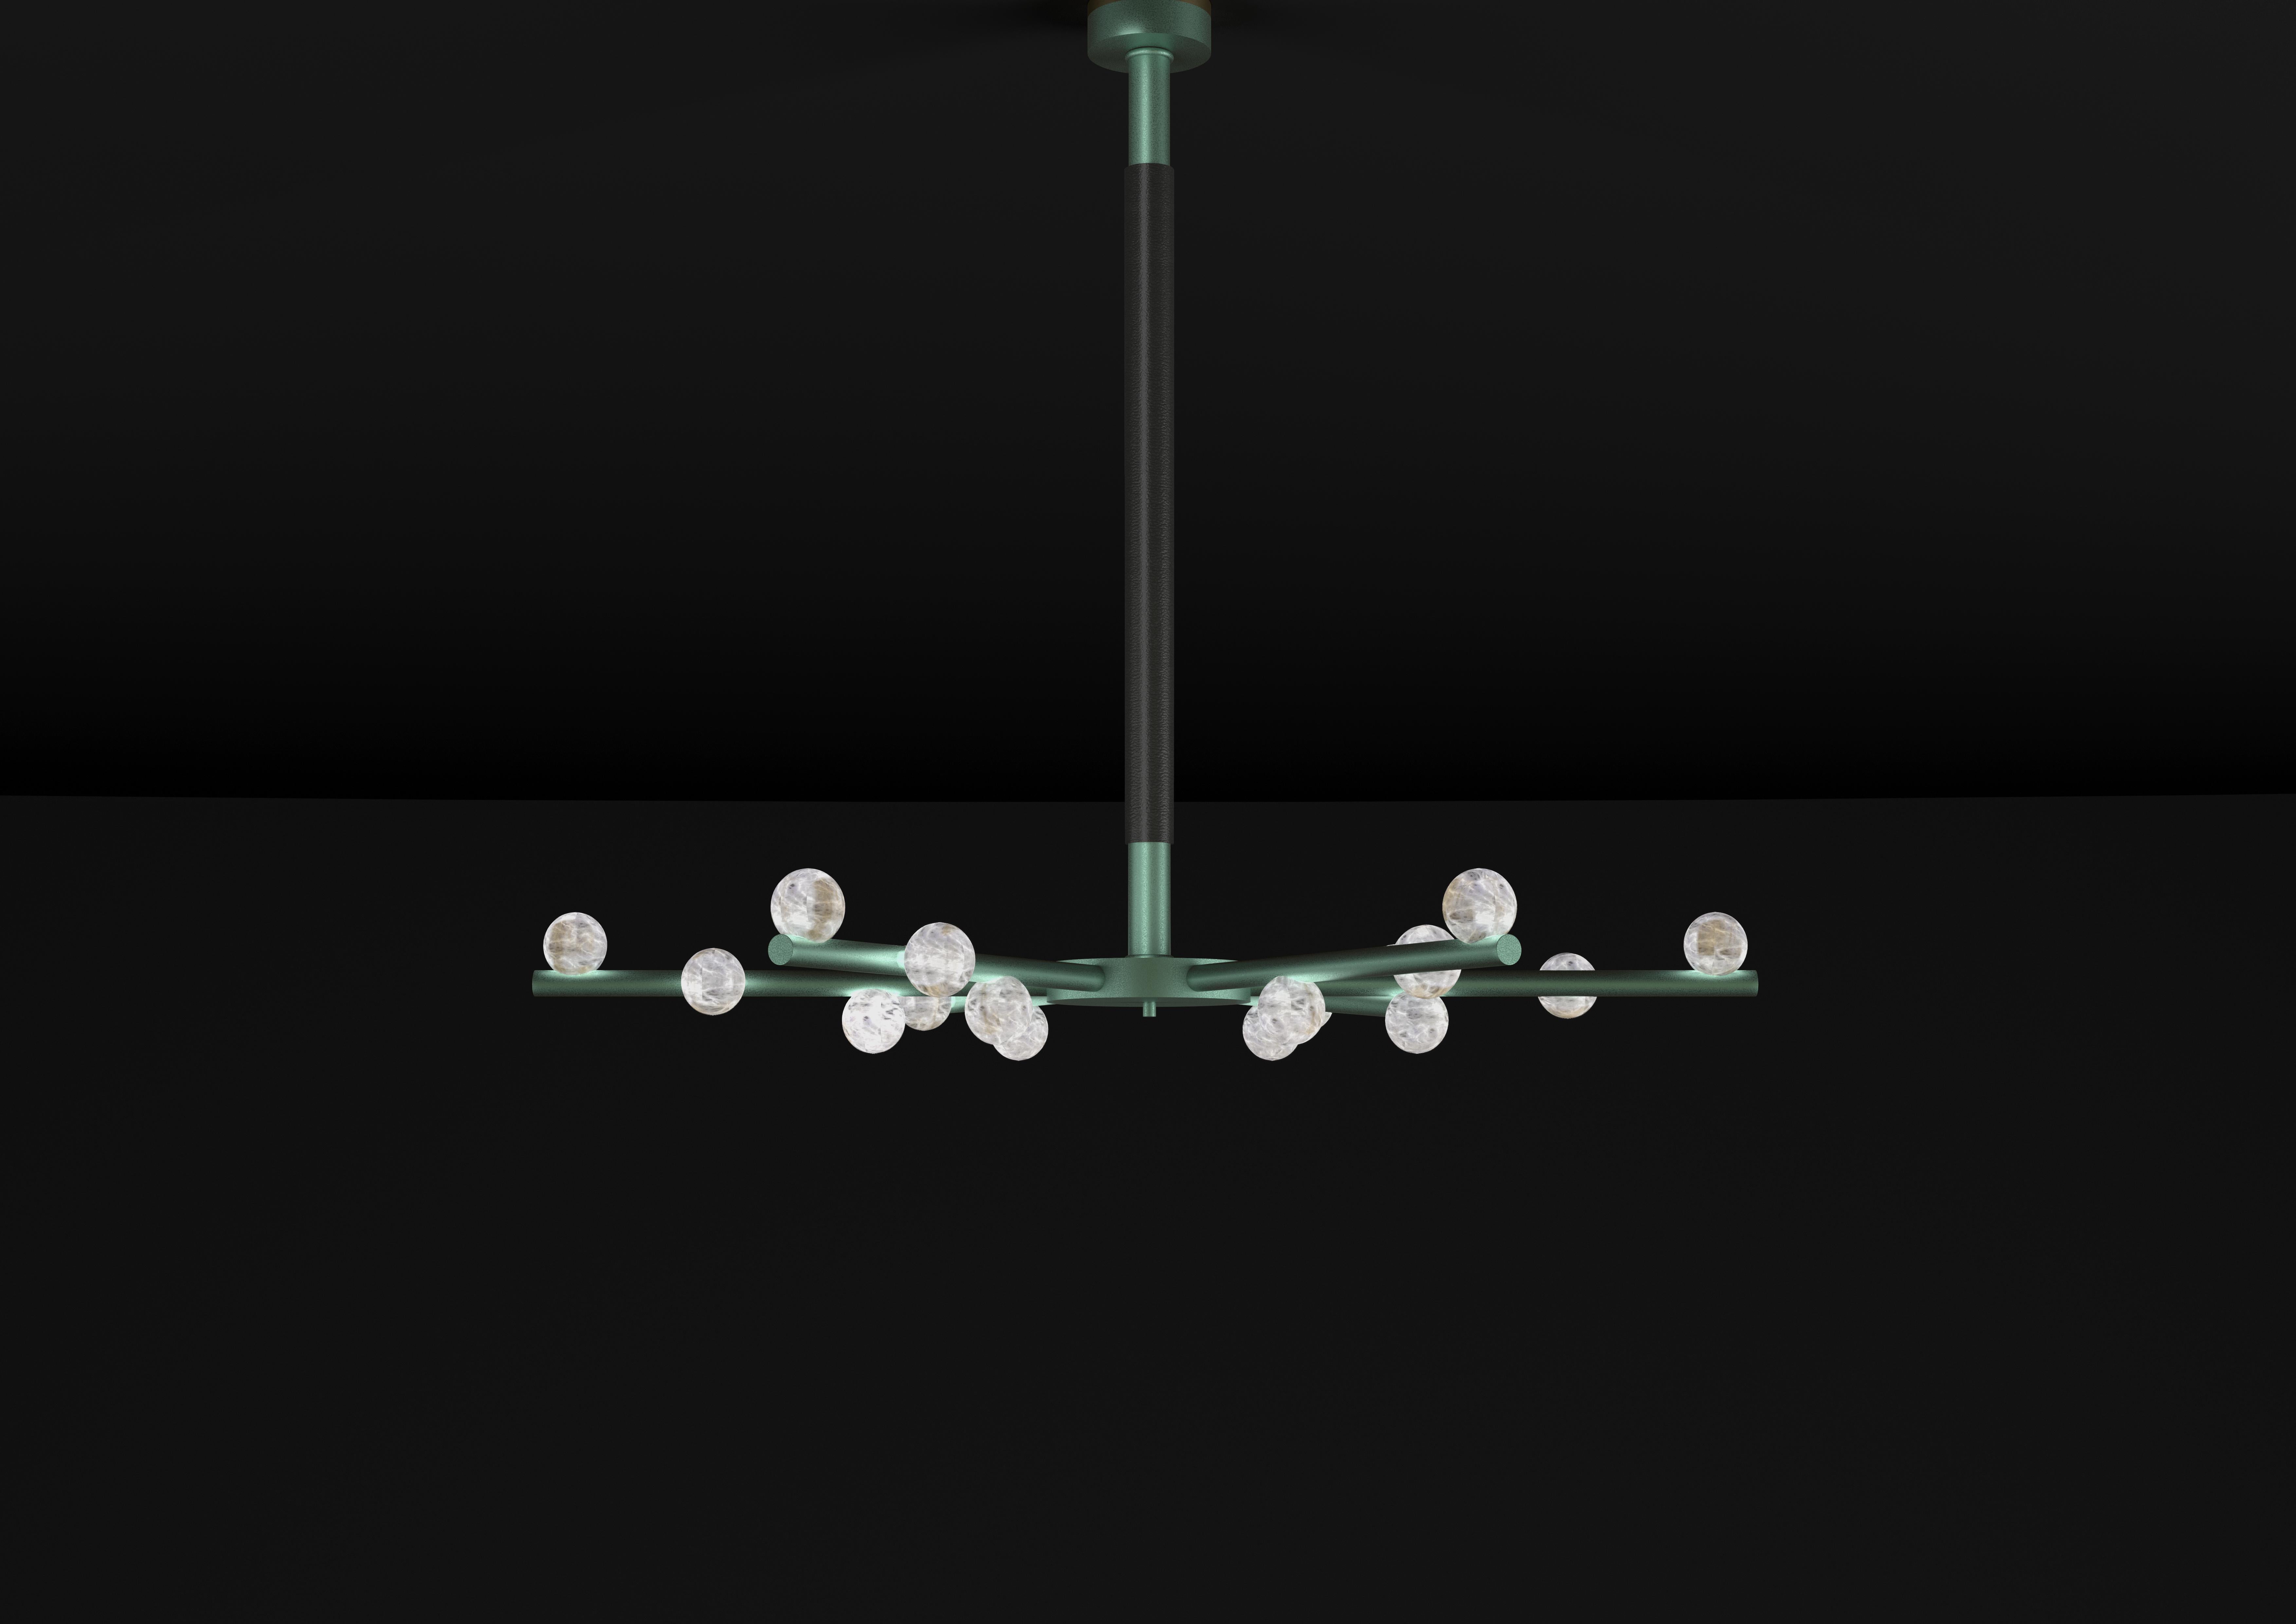 Demetra Freedom Green Metal Chandelier by Alabastro Italiano
Dimensions: D 85 x W 97 x H 85 cm.
Materials: White alabaster, freedom green metal and leather.

Available in different finishes: Shiny Silver, Bronze, Brushed Brass, Ruggine of Florence,